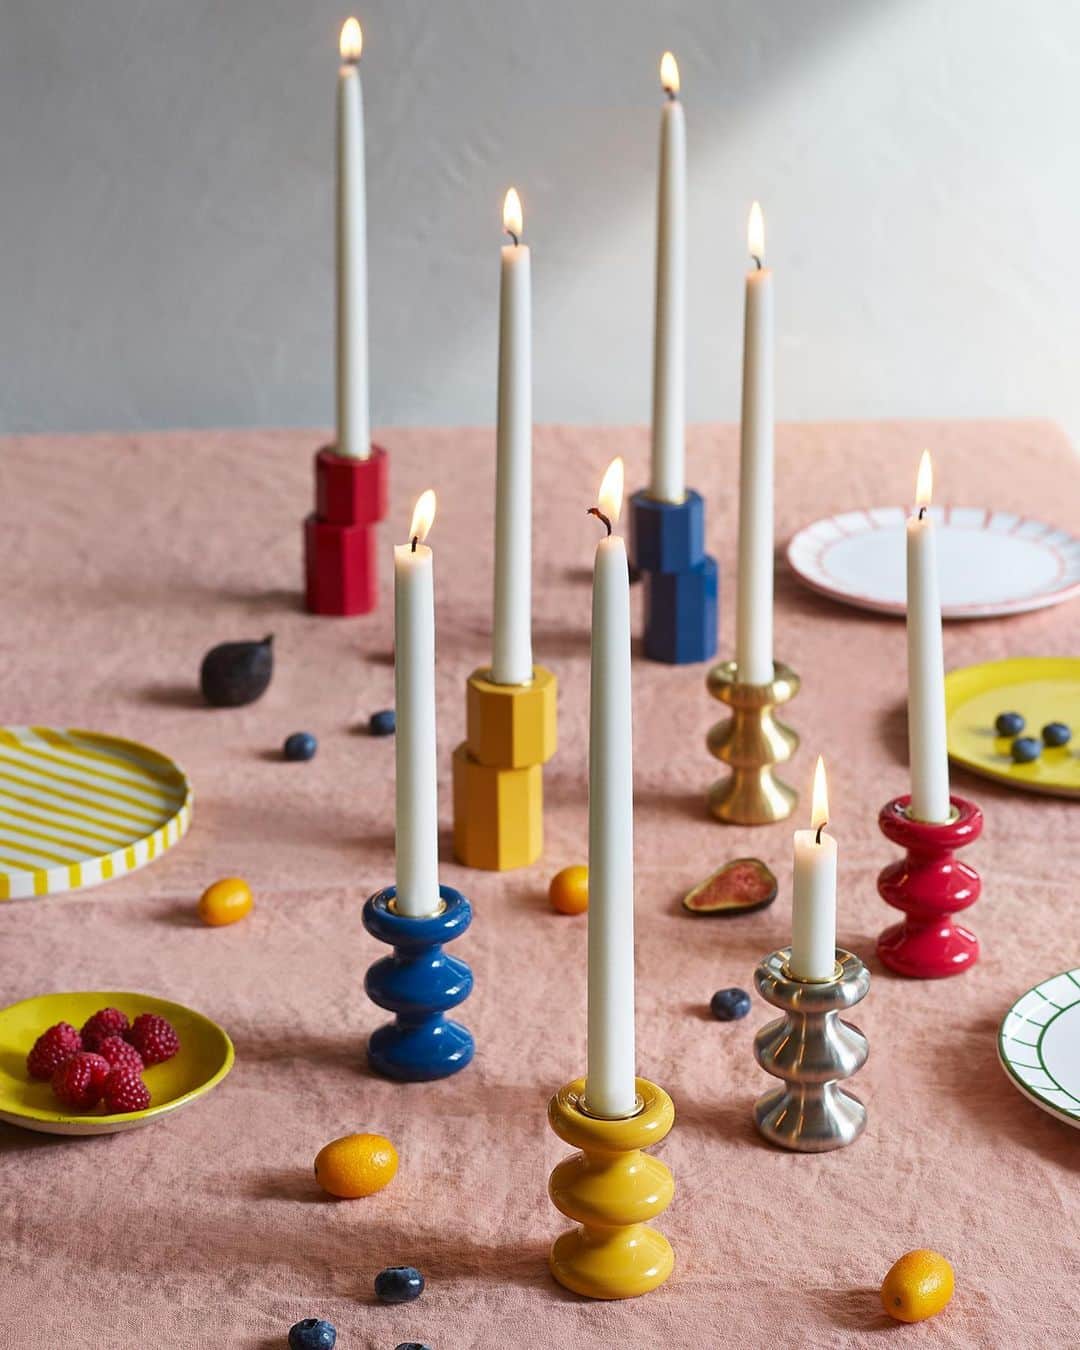 Design Milkのインスタグラム：「Bring some warmth + playfulness into your space with @eldvarm's latest candleholder collection. 🕯✨  Created by CEO of @eldvarm Louise Varre + designer @charles_kalpakian, each design is inspired by our primal connection to fire + the environment. 🔥 With their unique designs + vibrant colors, you easily can mix + match for a harmonious display. \\\ Head to the link in bio to see more. 🔗  Photography by @fotografhelenpe; Styled by @ullstranddesign.」